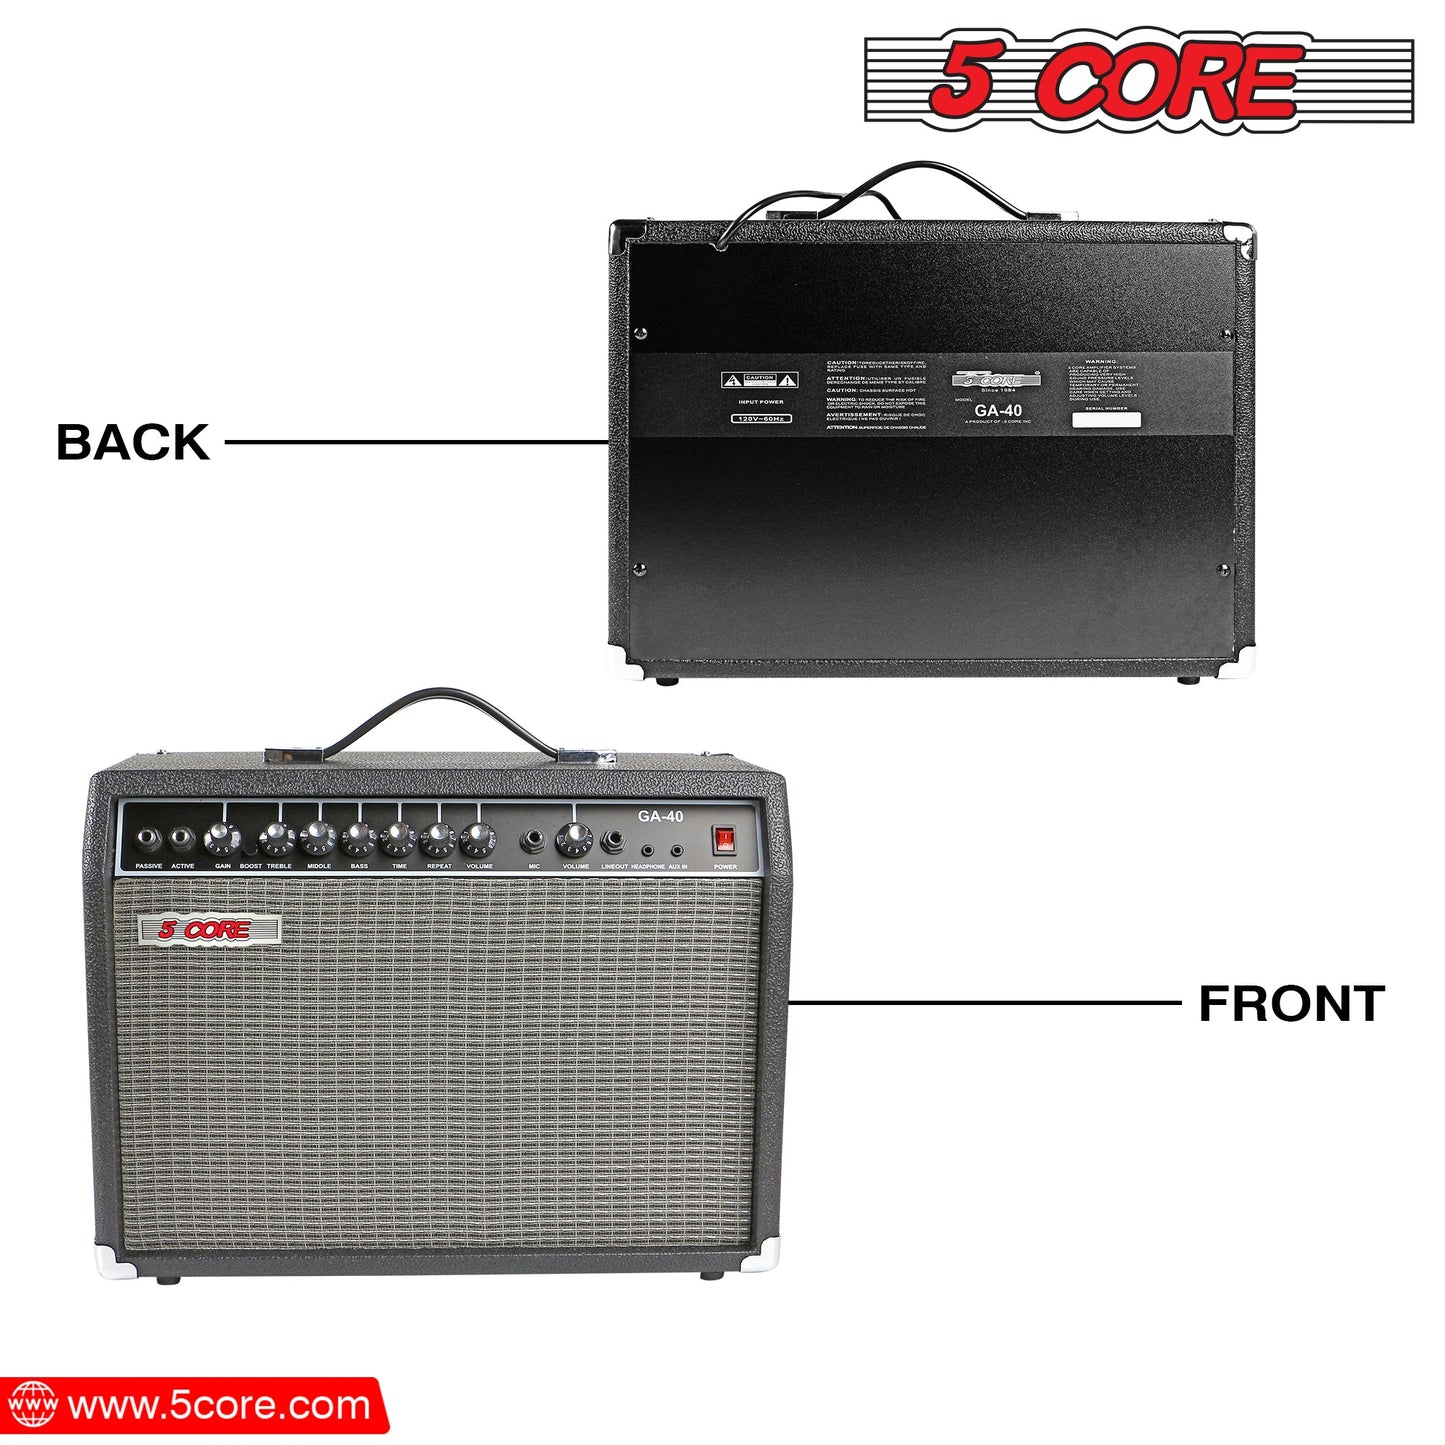 5 Core 40W Guitar Amplifier Black - Clean and Distortion Channel - Electric Amp with Equalization and AUX Line Input - for Recording Studio, Practice Room, Small Courtyard- GA 40 BLK-6